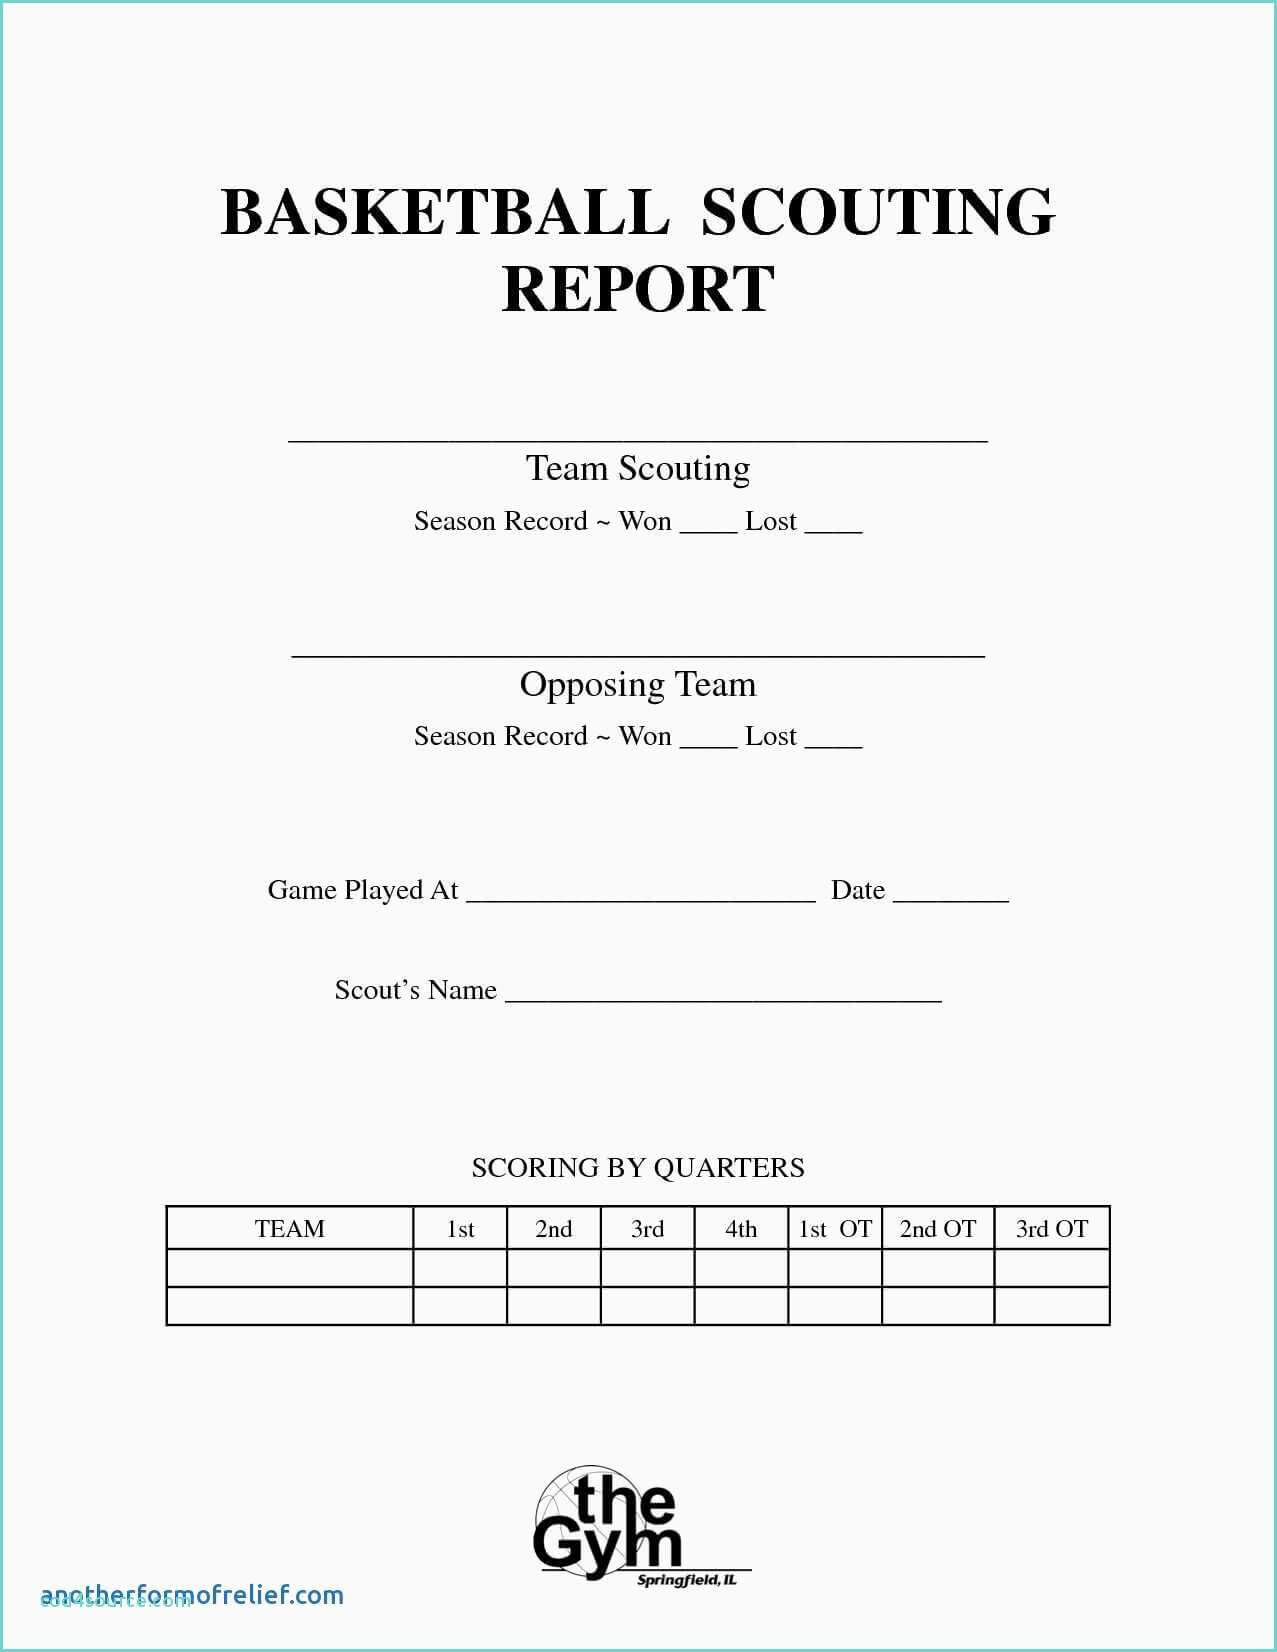 Bowling Spreadsheet And Basketball Scouting Report Template Intended For Scouting Report Template Basketball